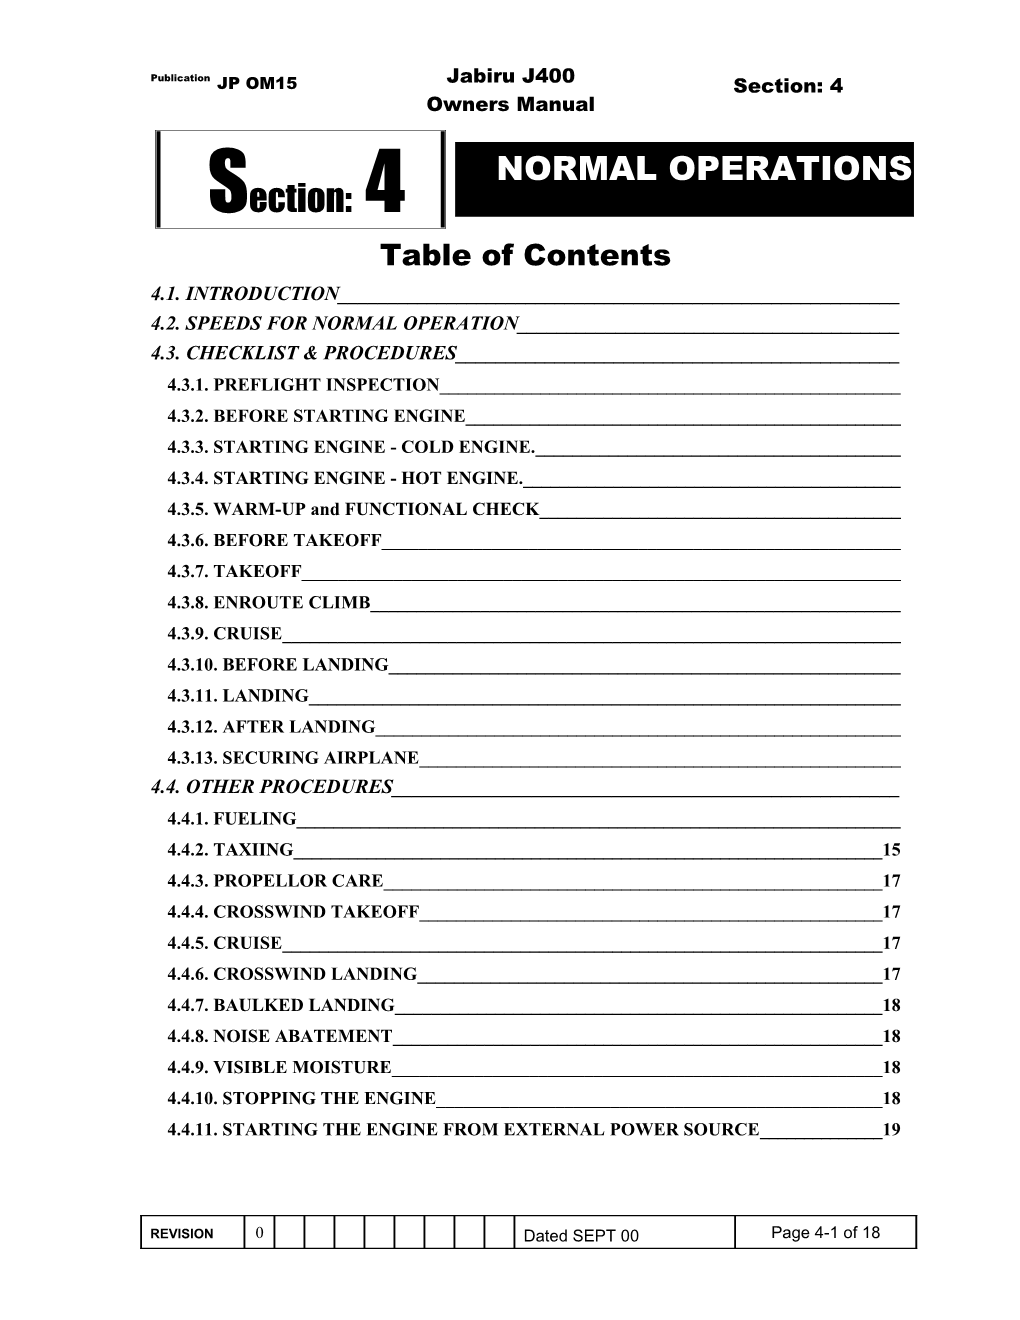 4.2. Speeds for Normal Operation